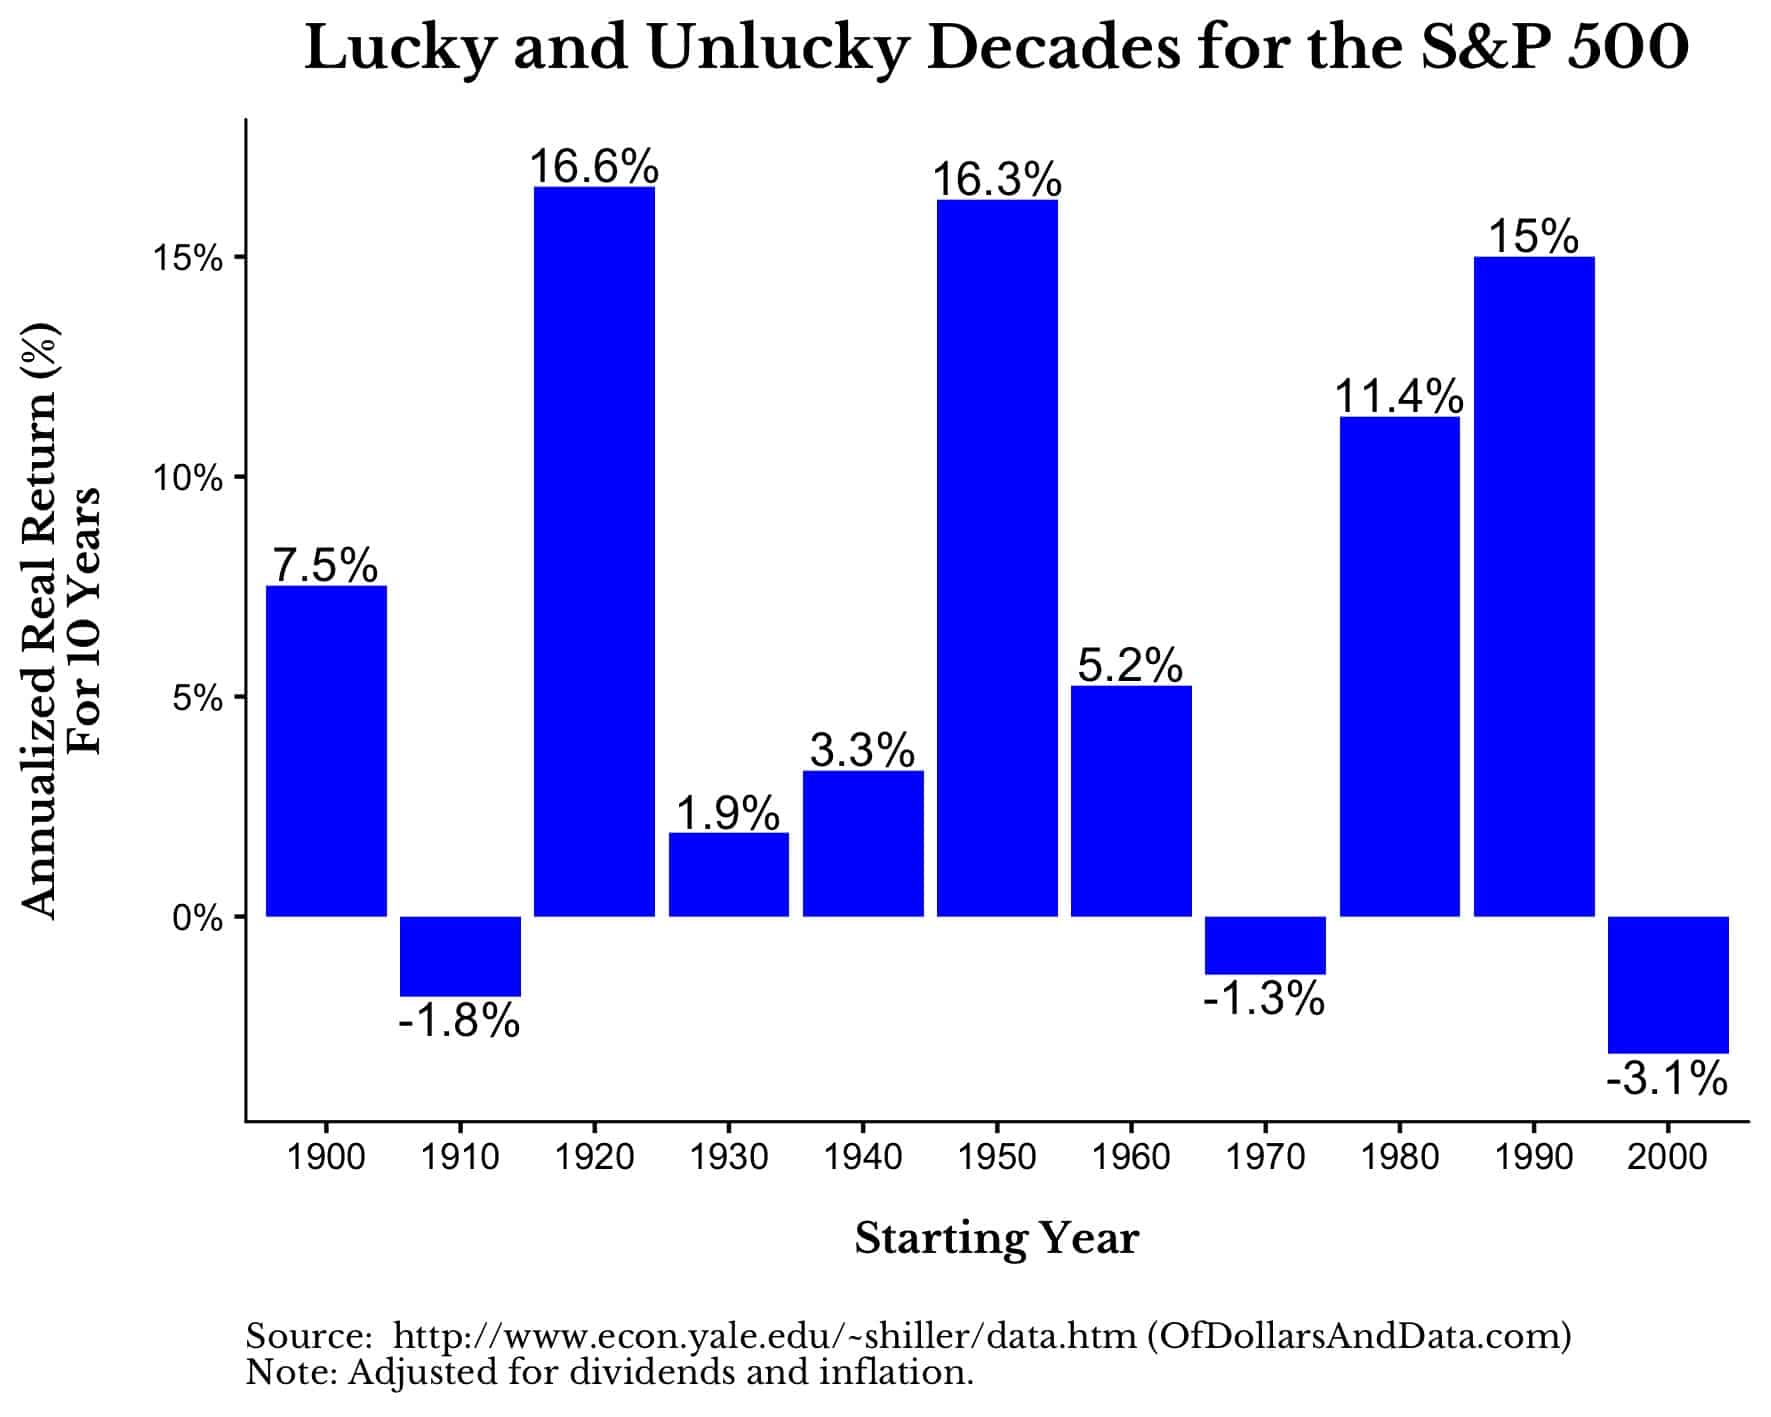 Chart showing S&P 500 annualized real return by decade from 1900 to 2009.